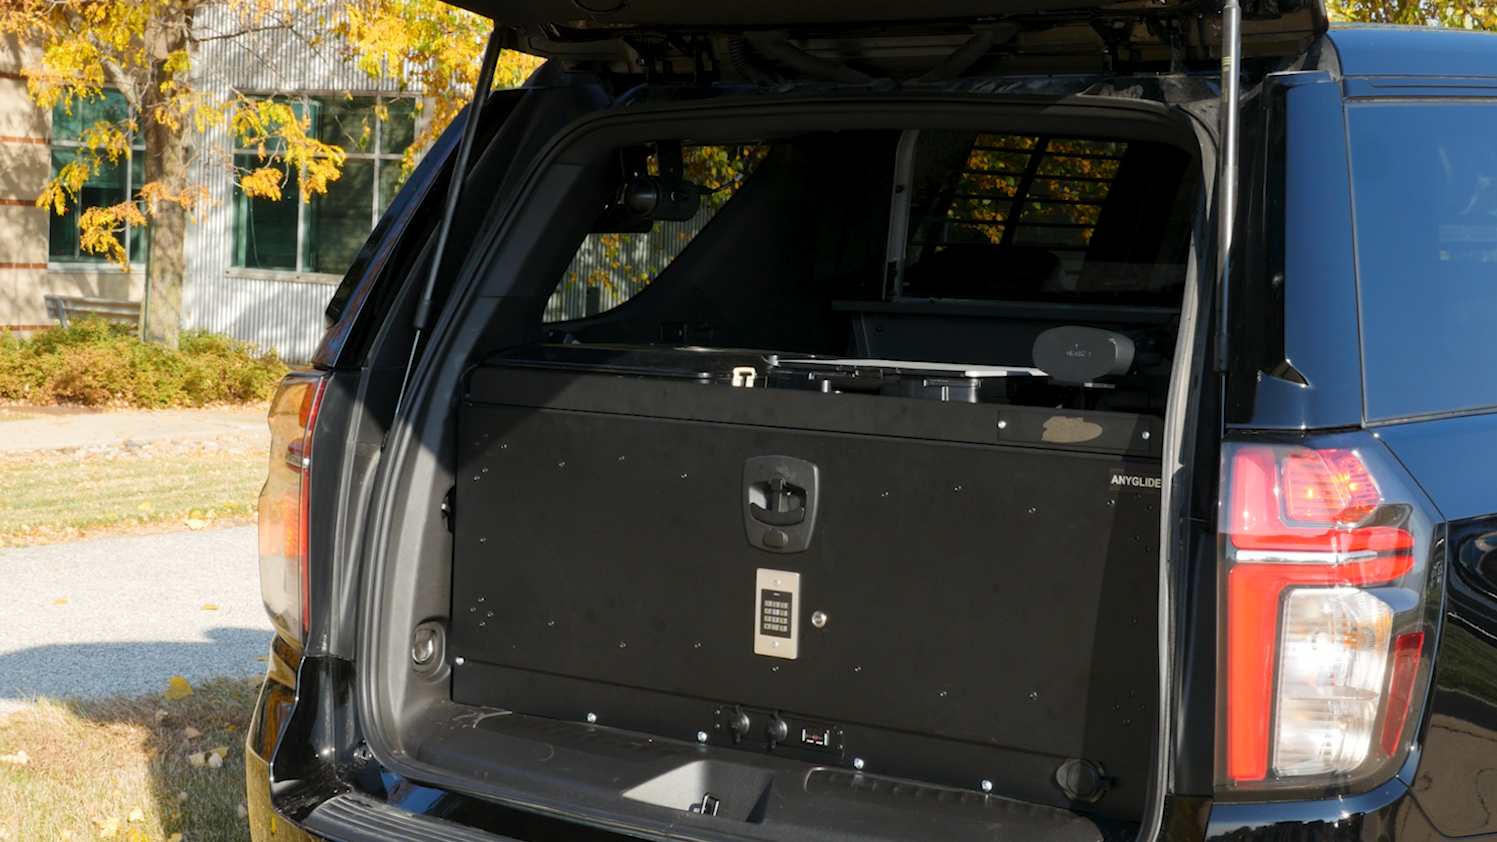 Rear storage box for Chevy Tahoe from AnyGlide